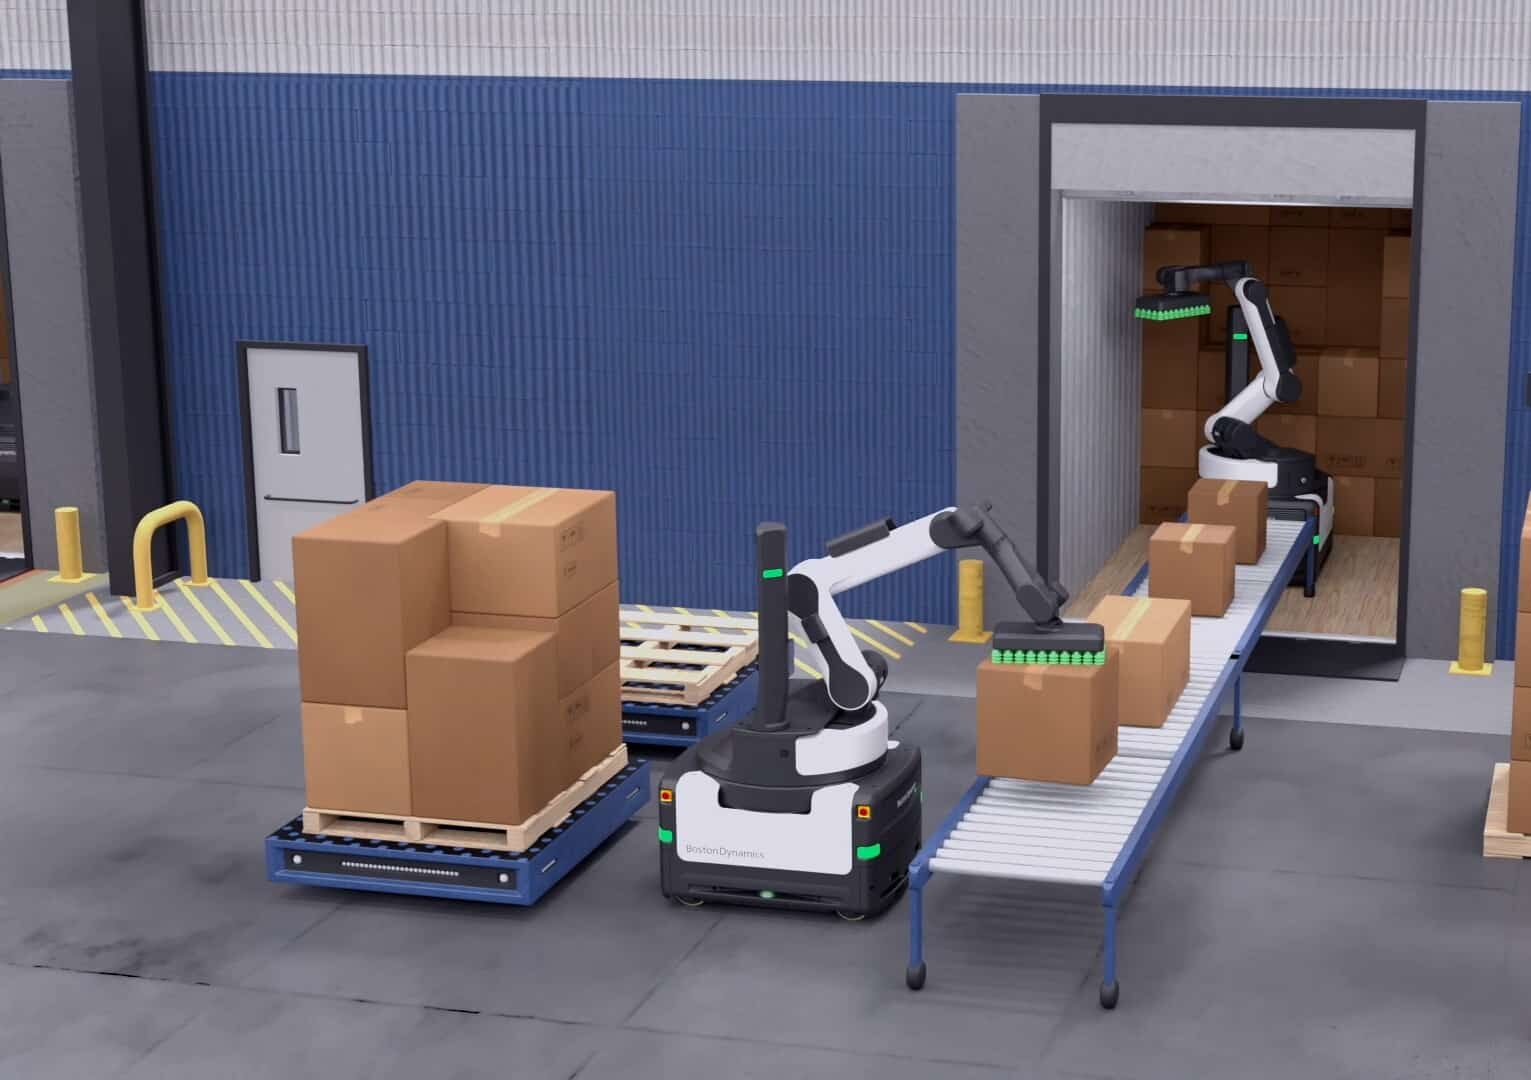 An render of two Stretch robots working in tandem. One unloads a trailer, while the other palletizes the cases